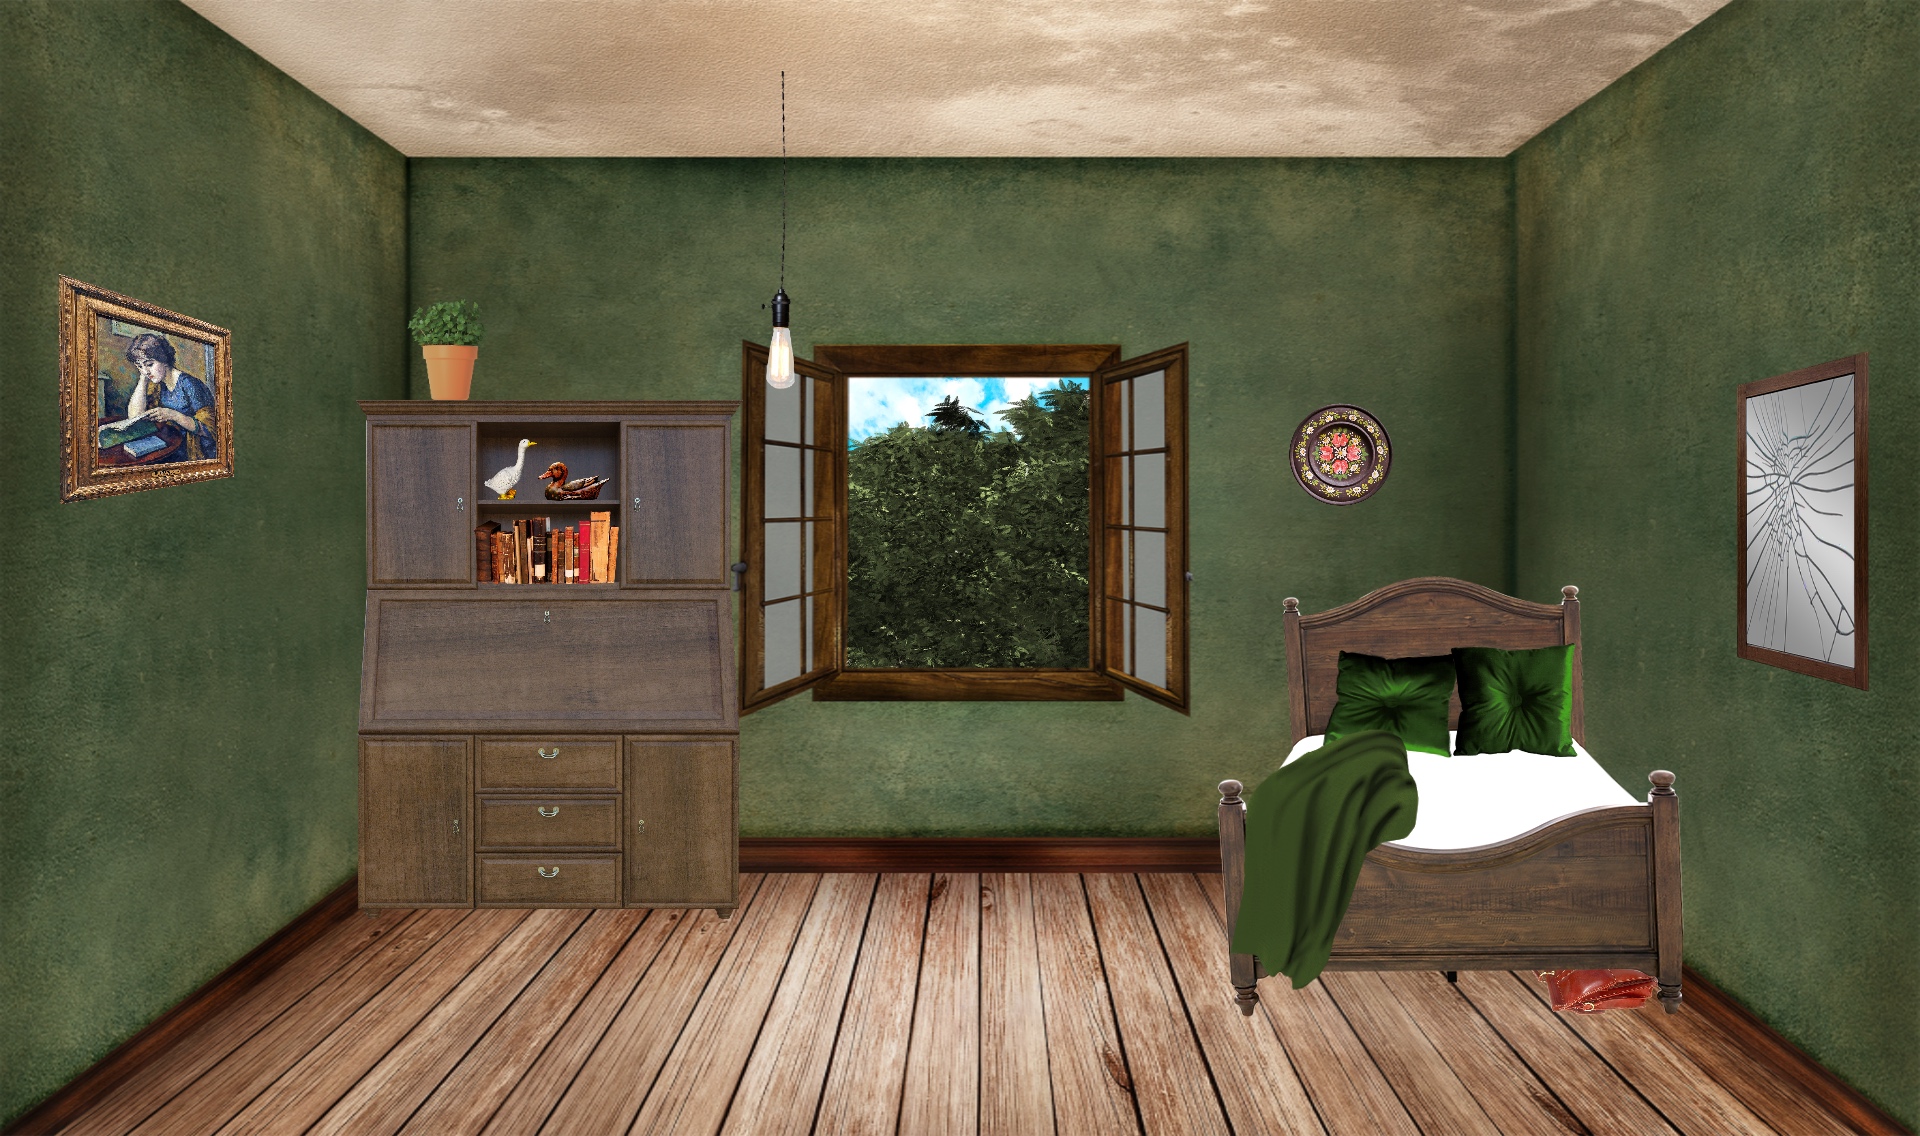 INT. HOME ALONE BEDROOM GREEN – DAY